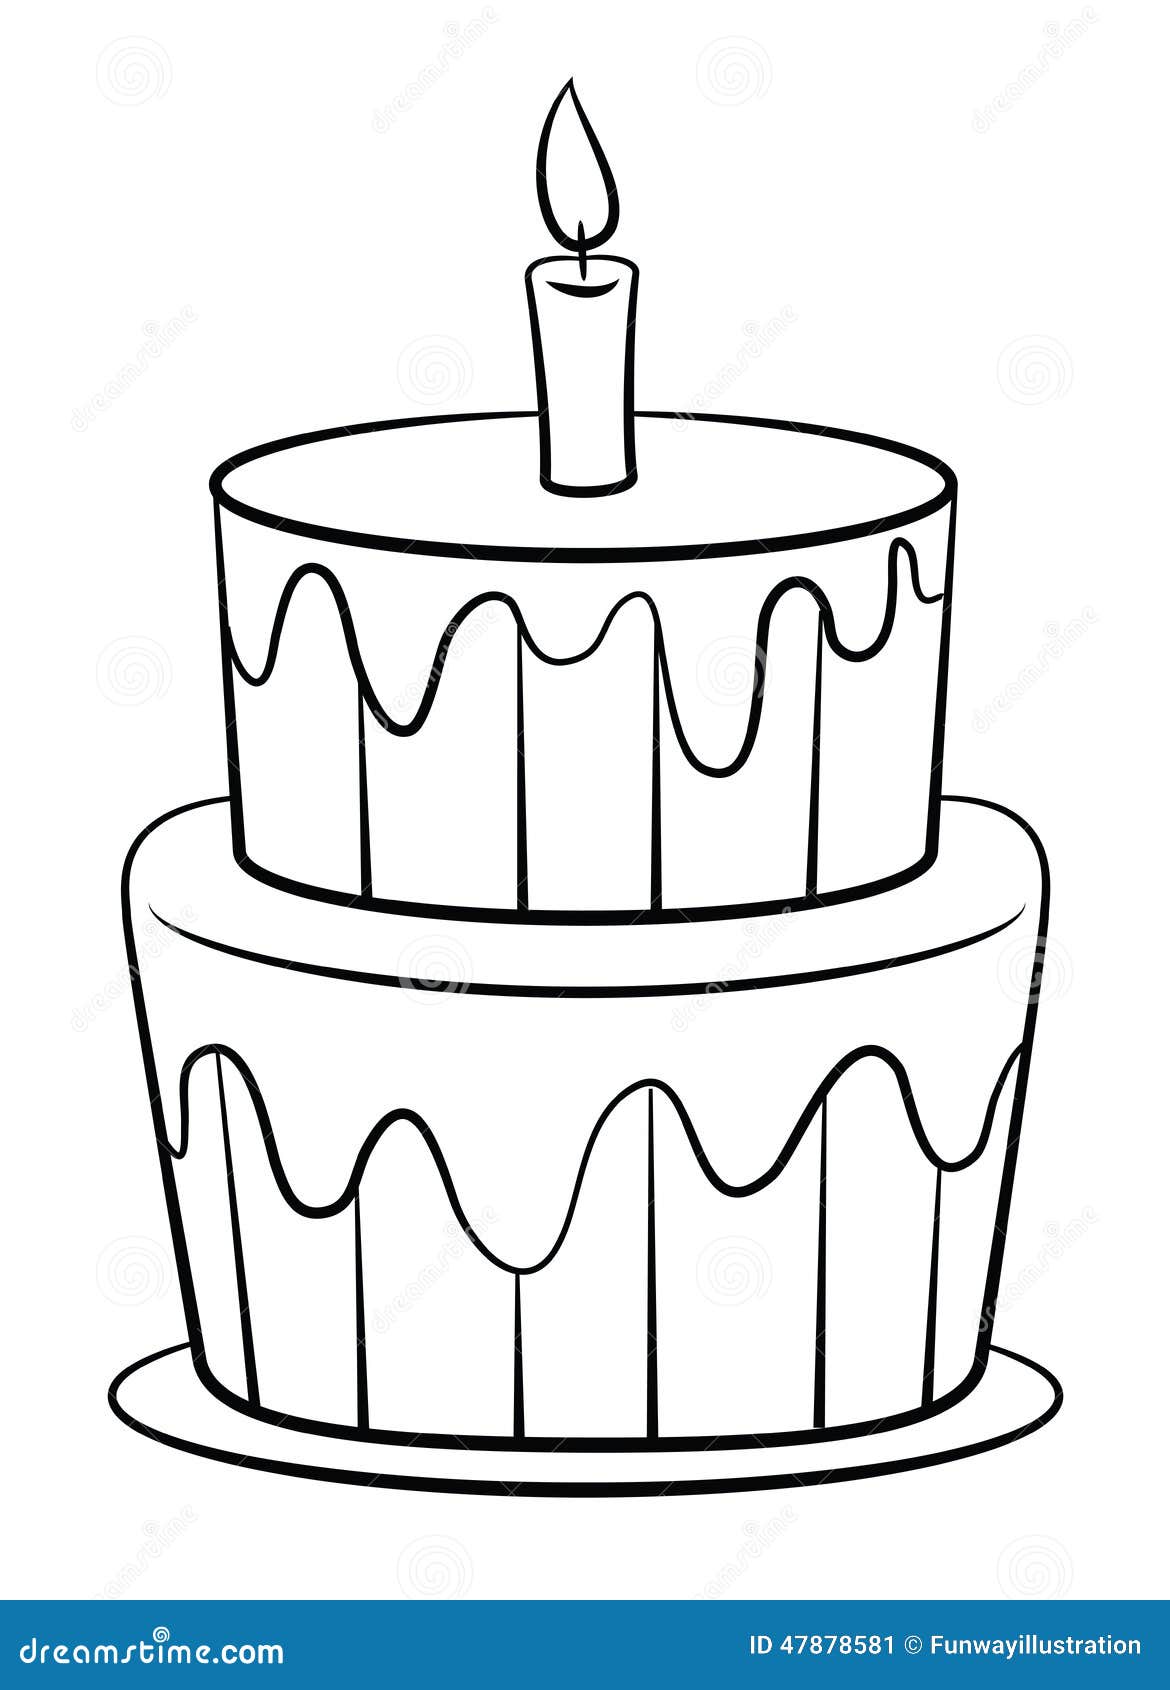 cake coloring pages with congratulations - photo #24